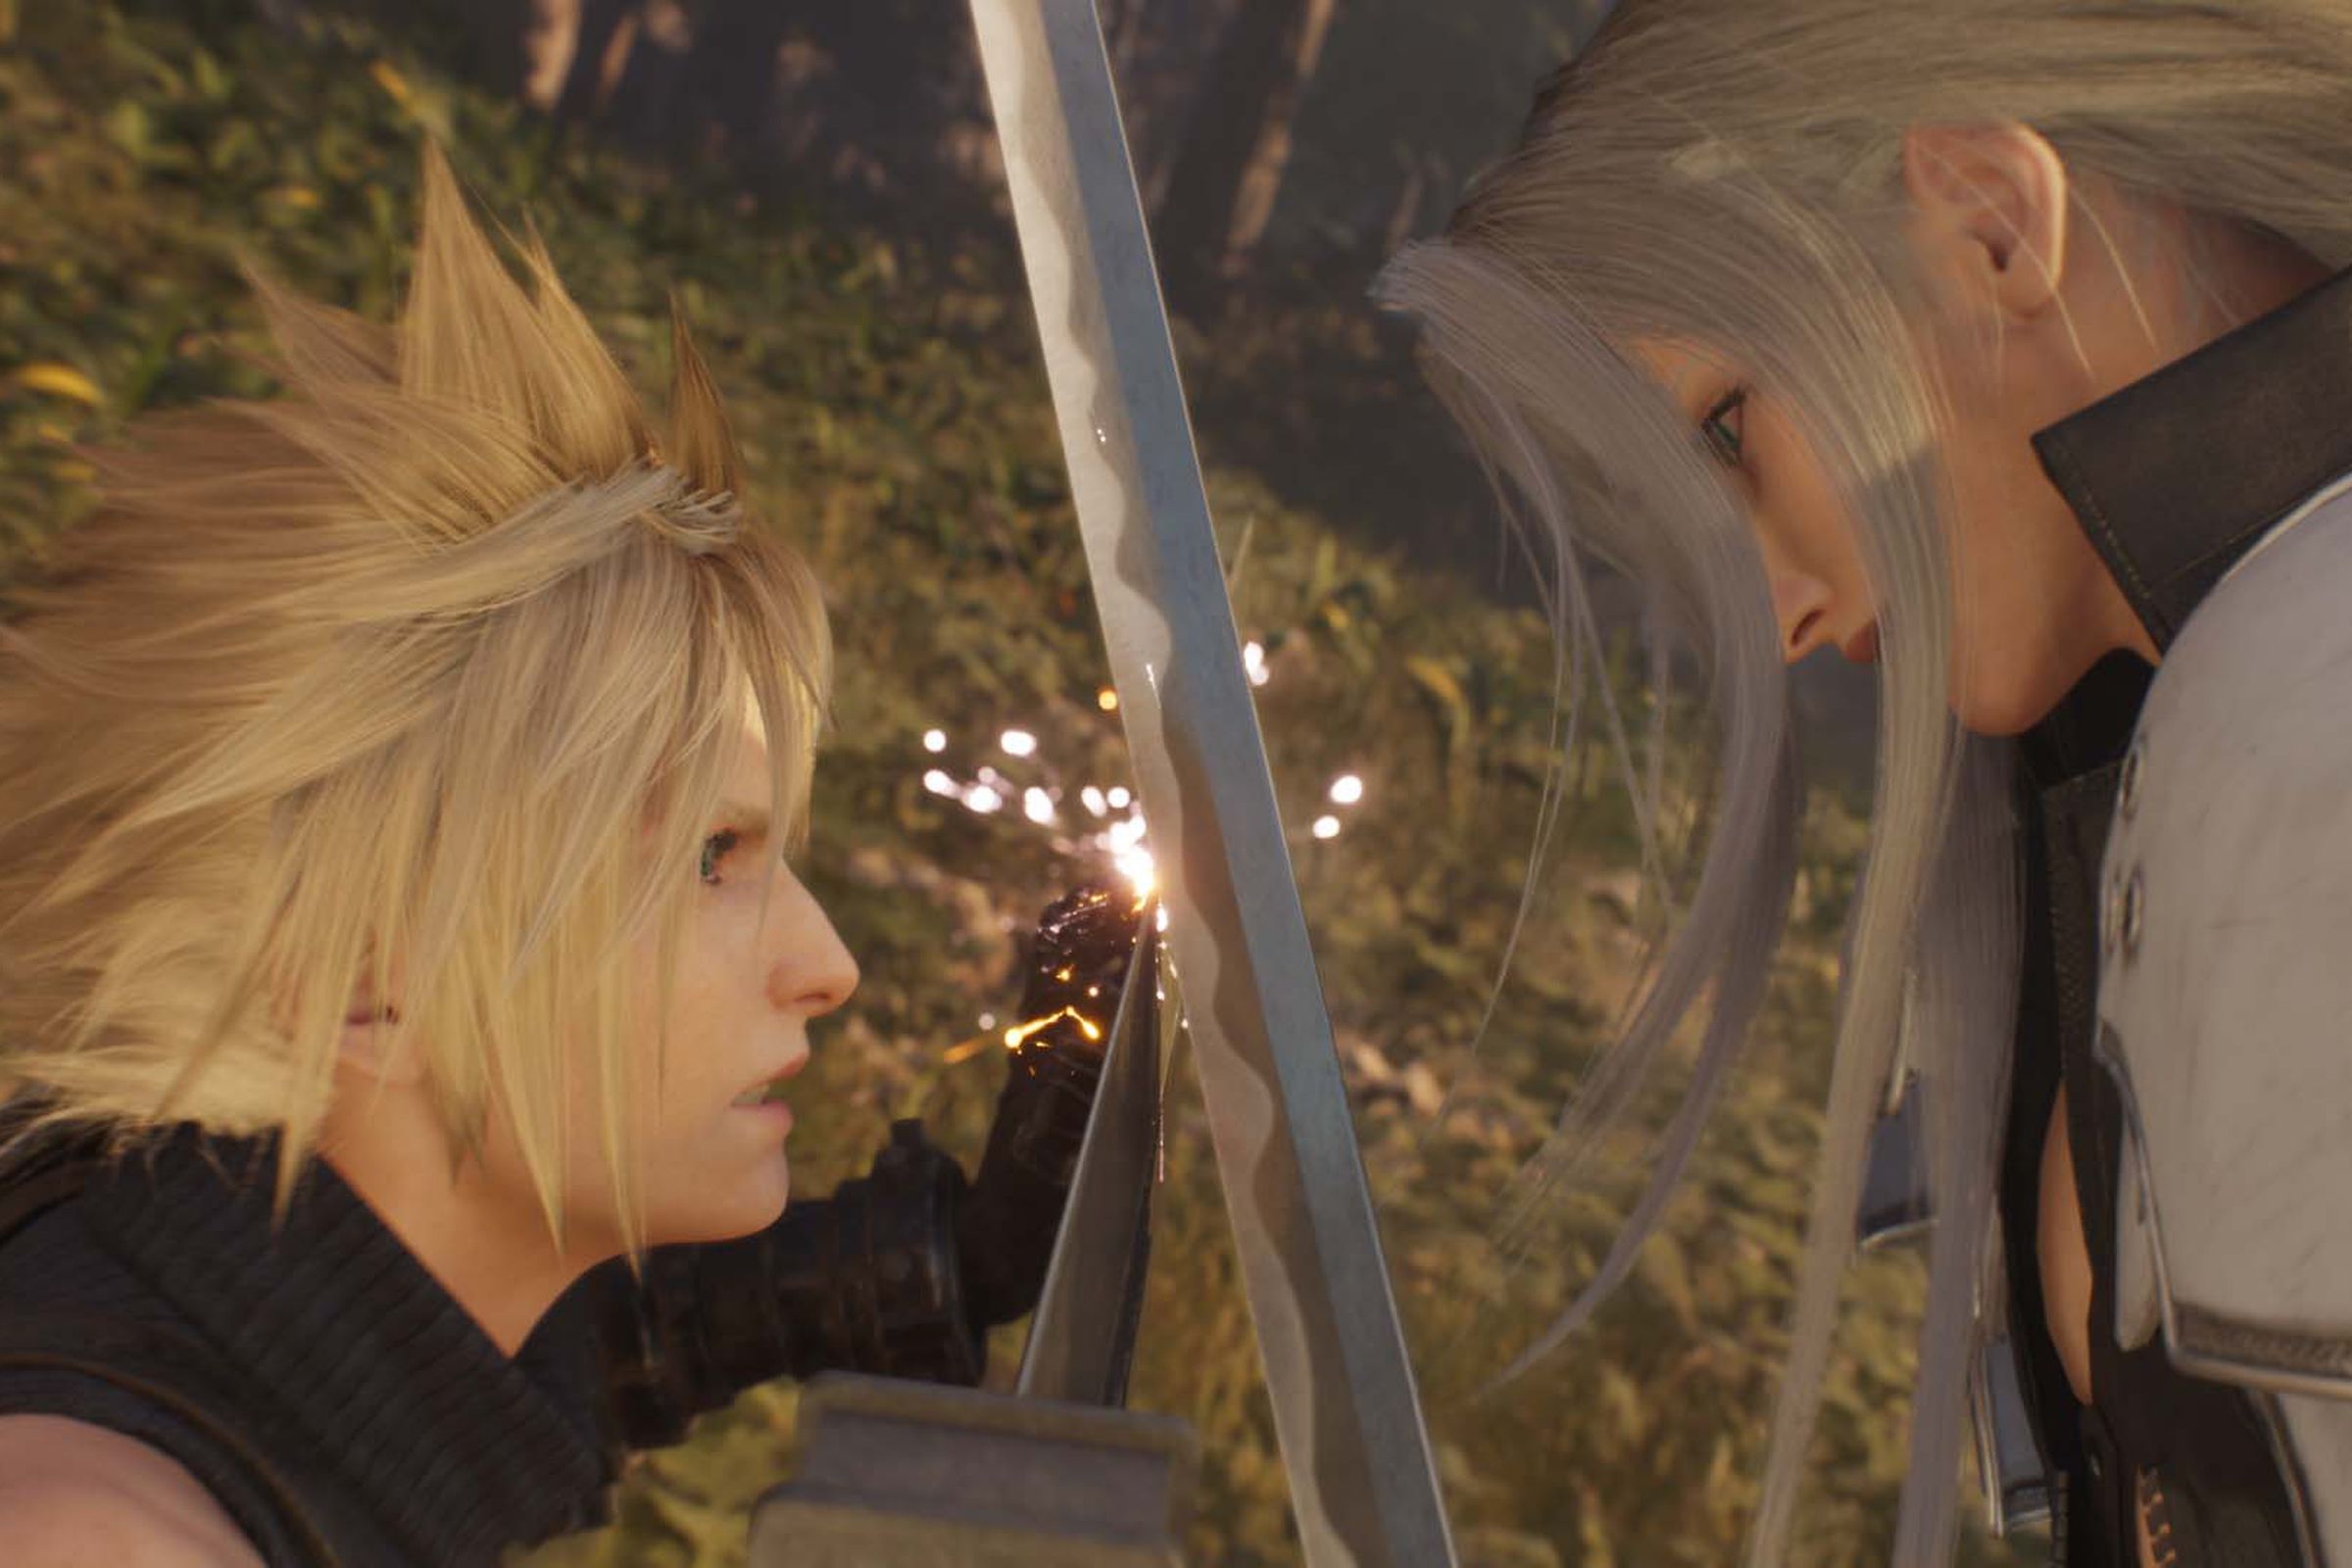 Screenshot from Final Fantasy VII Rebirth featuring a close-up of Cloud (left) and Sephiroth (right) clashing swords.